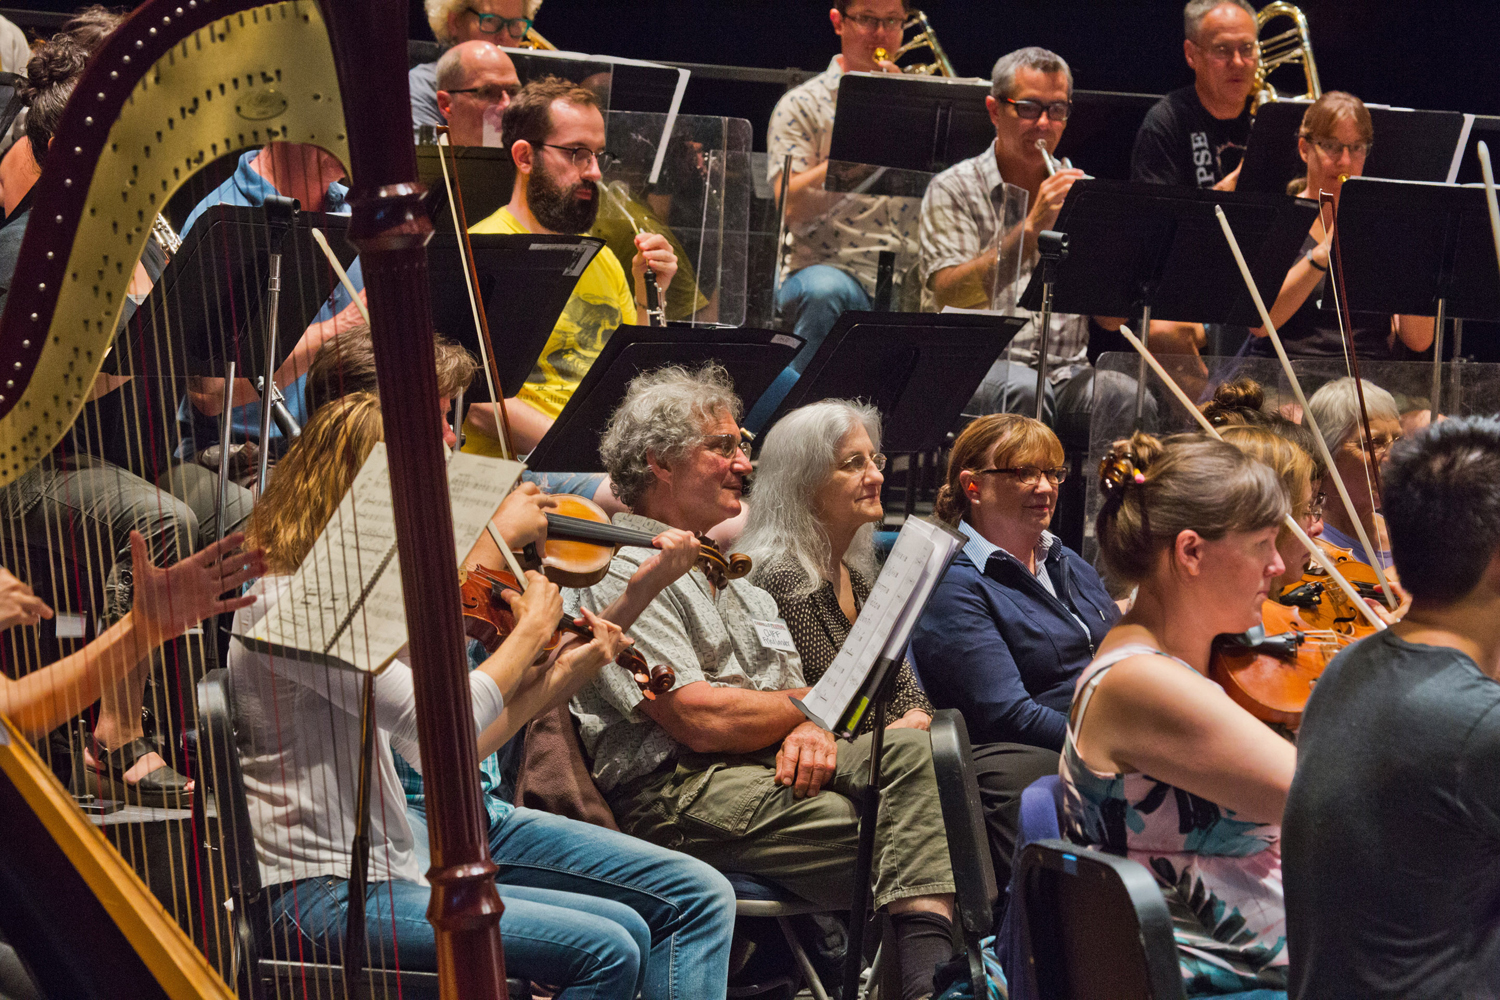 Donors sit "Inside the Orchestra" during a rehearsal.